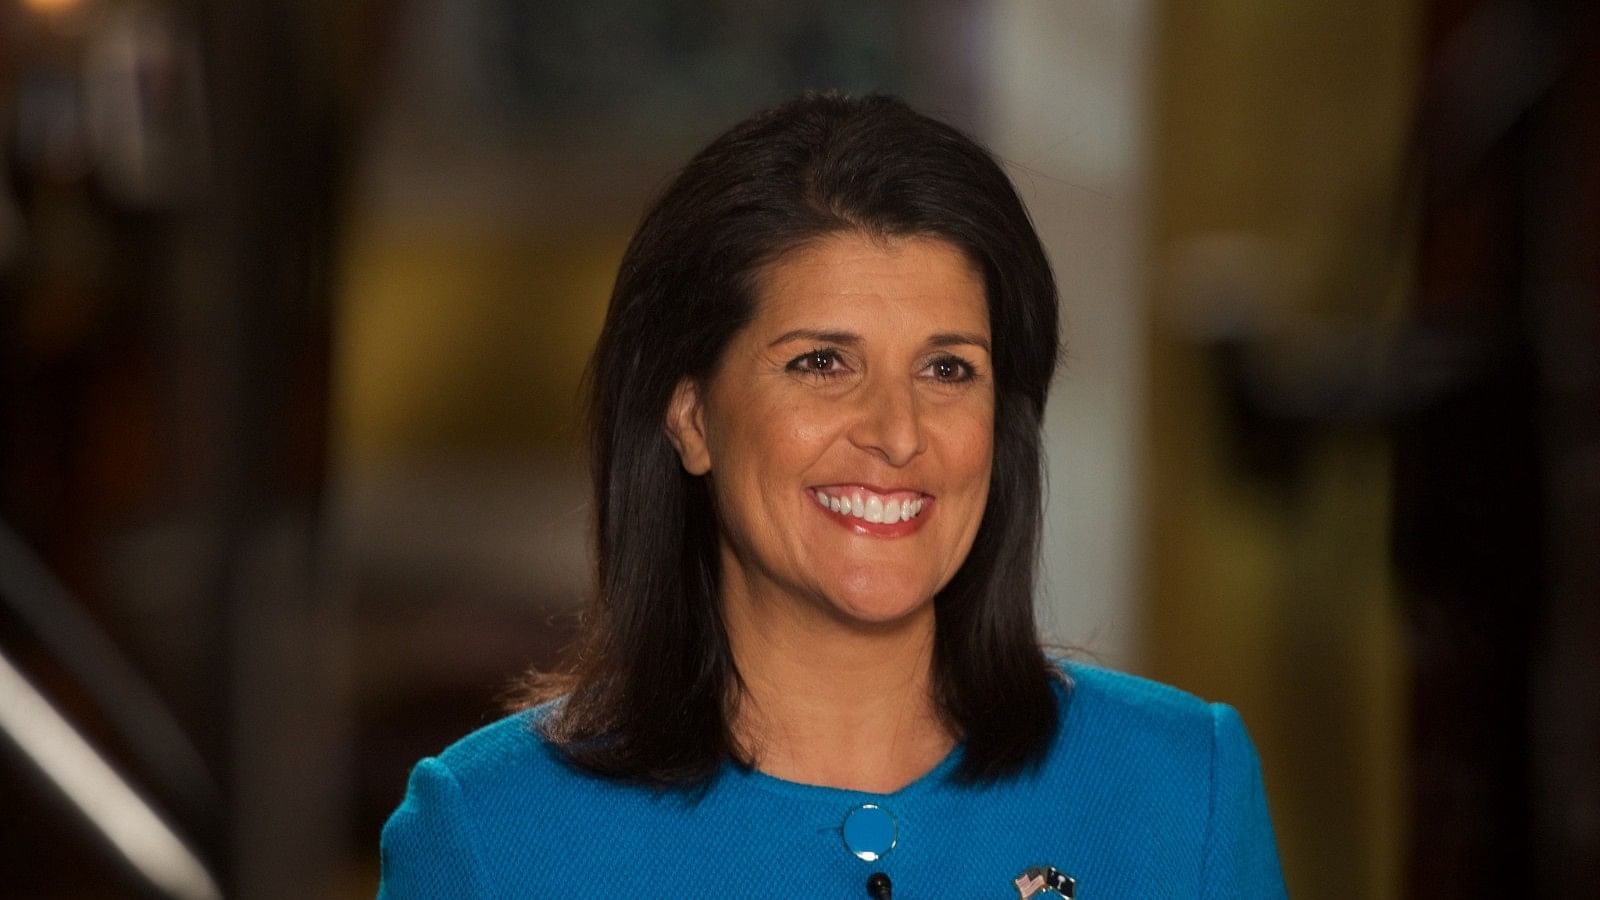 <div class="paragraphs"><p>Former South Carolina Governor and member of the Republican Party Nikki Haley has announced on Tuesday, 14 February, that she will run for president of the United States in 2024,</p></div>